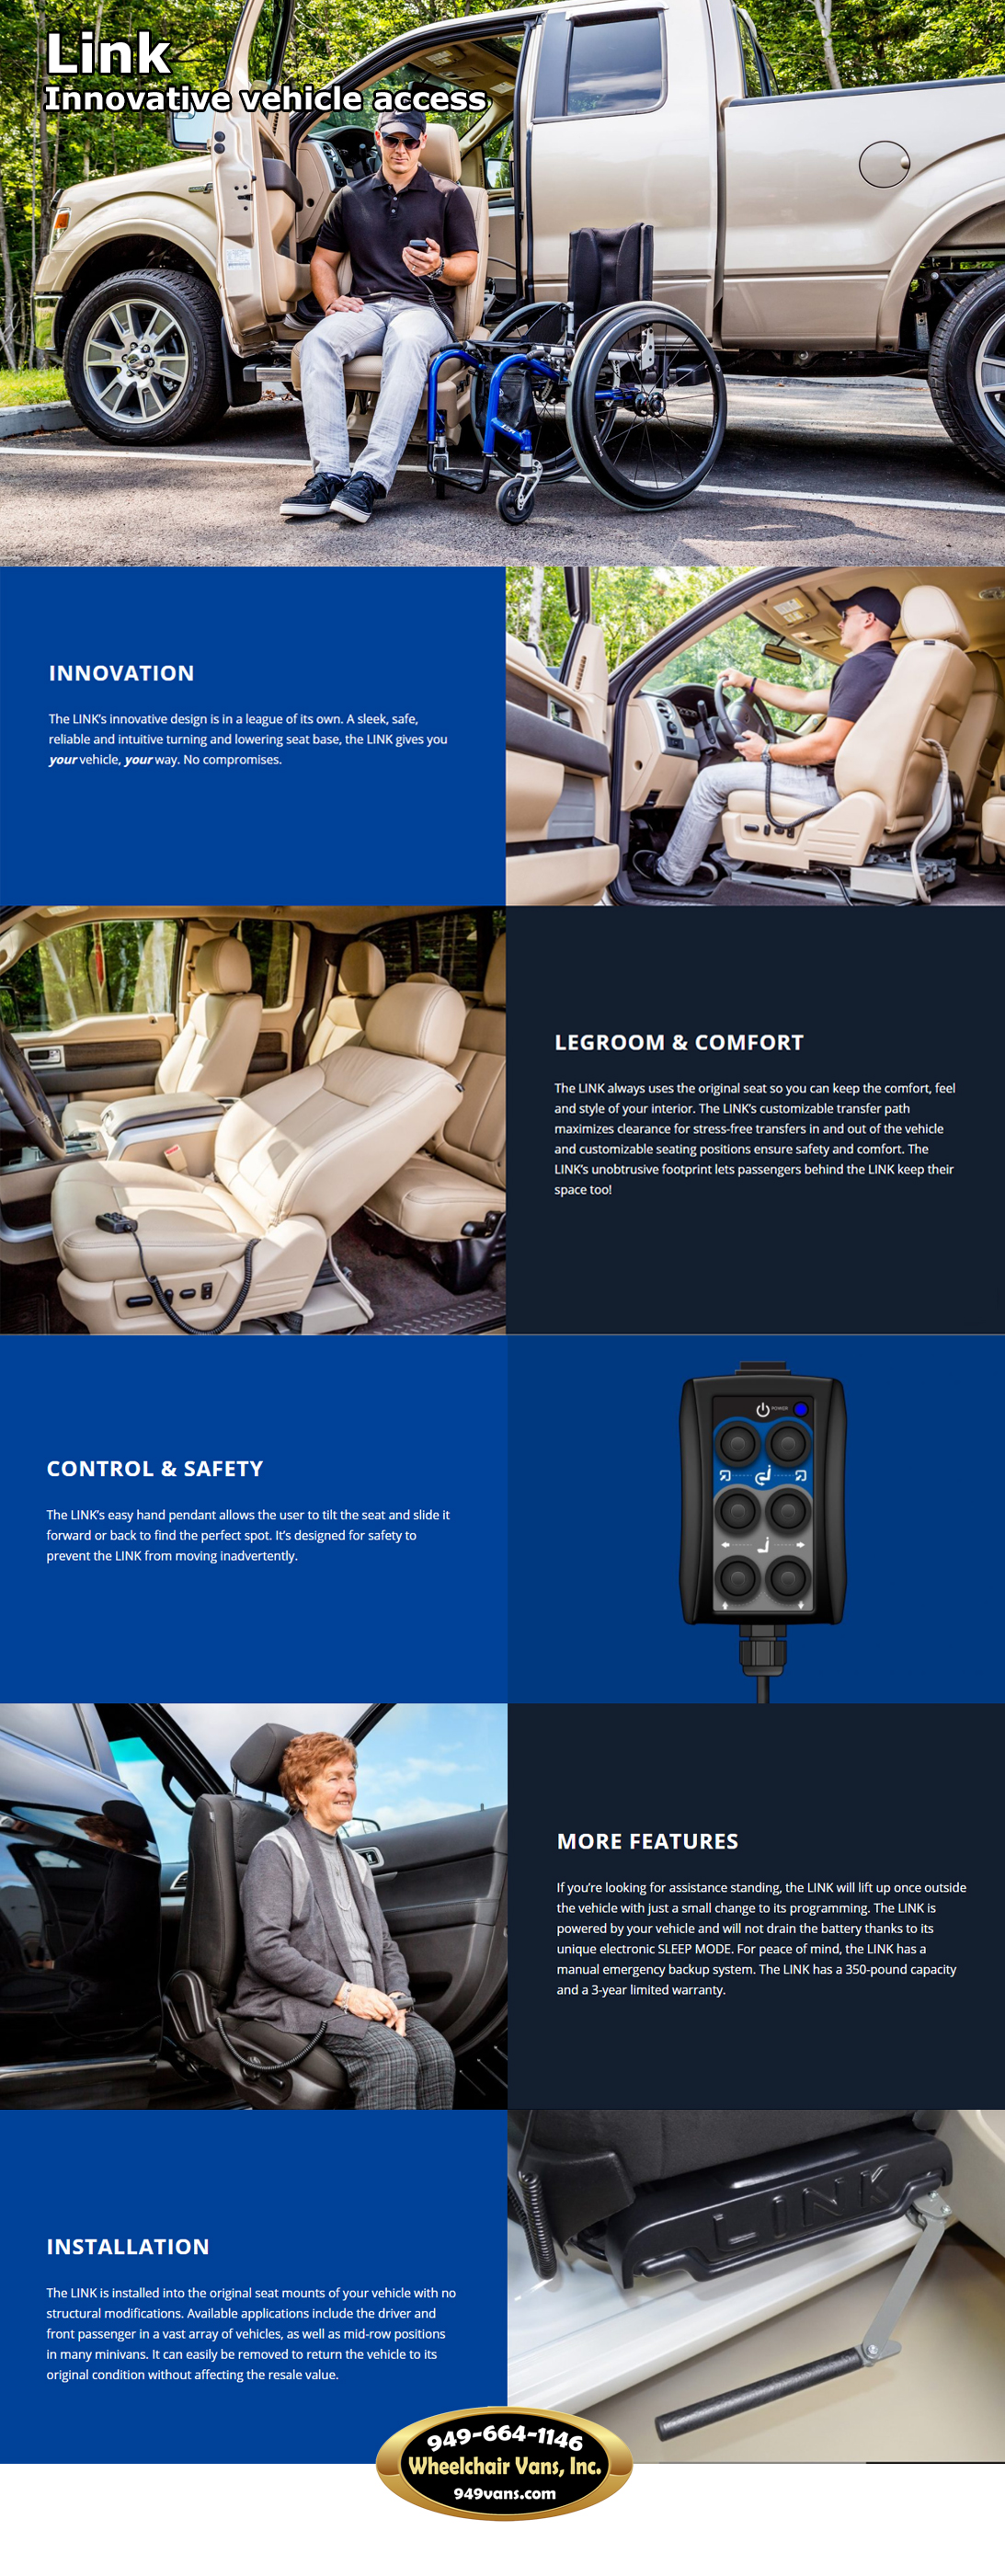 adapt-solutions-link-mobility-access-seat-brochure